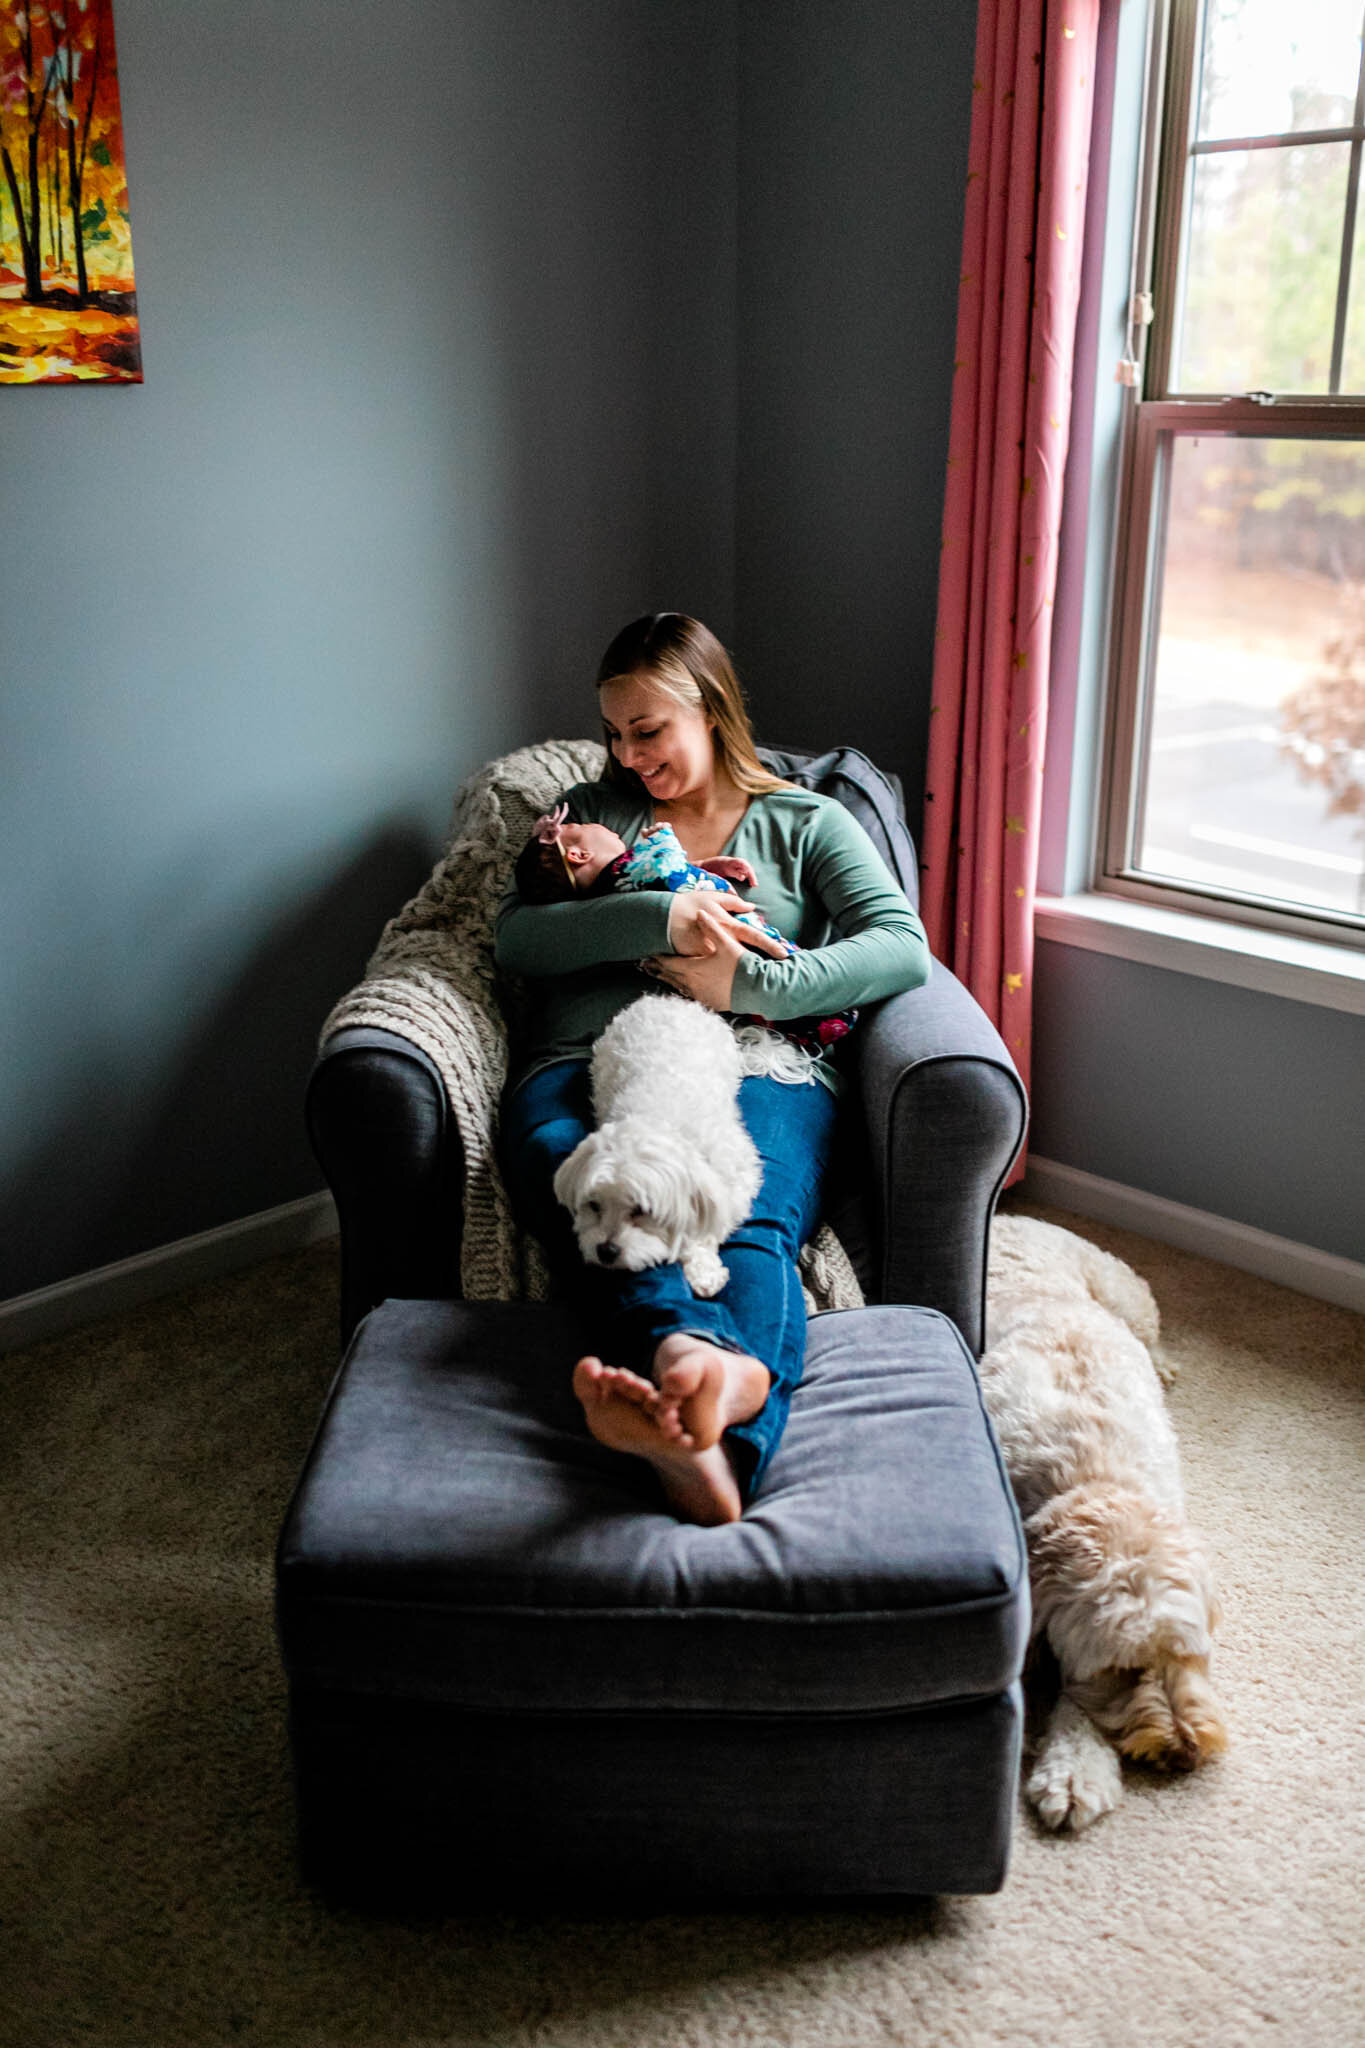 Durham Newborn Photographer | By G. Lin Photography | Candid portrait of mom in nursery with baby and dogs